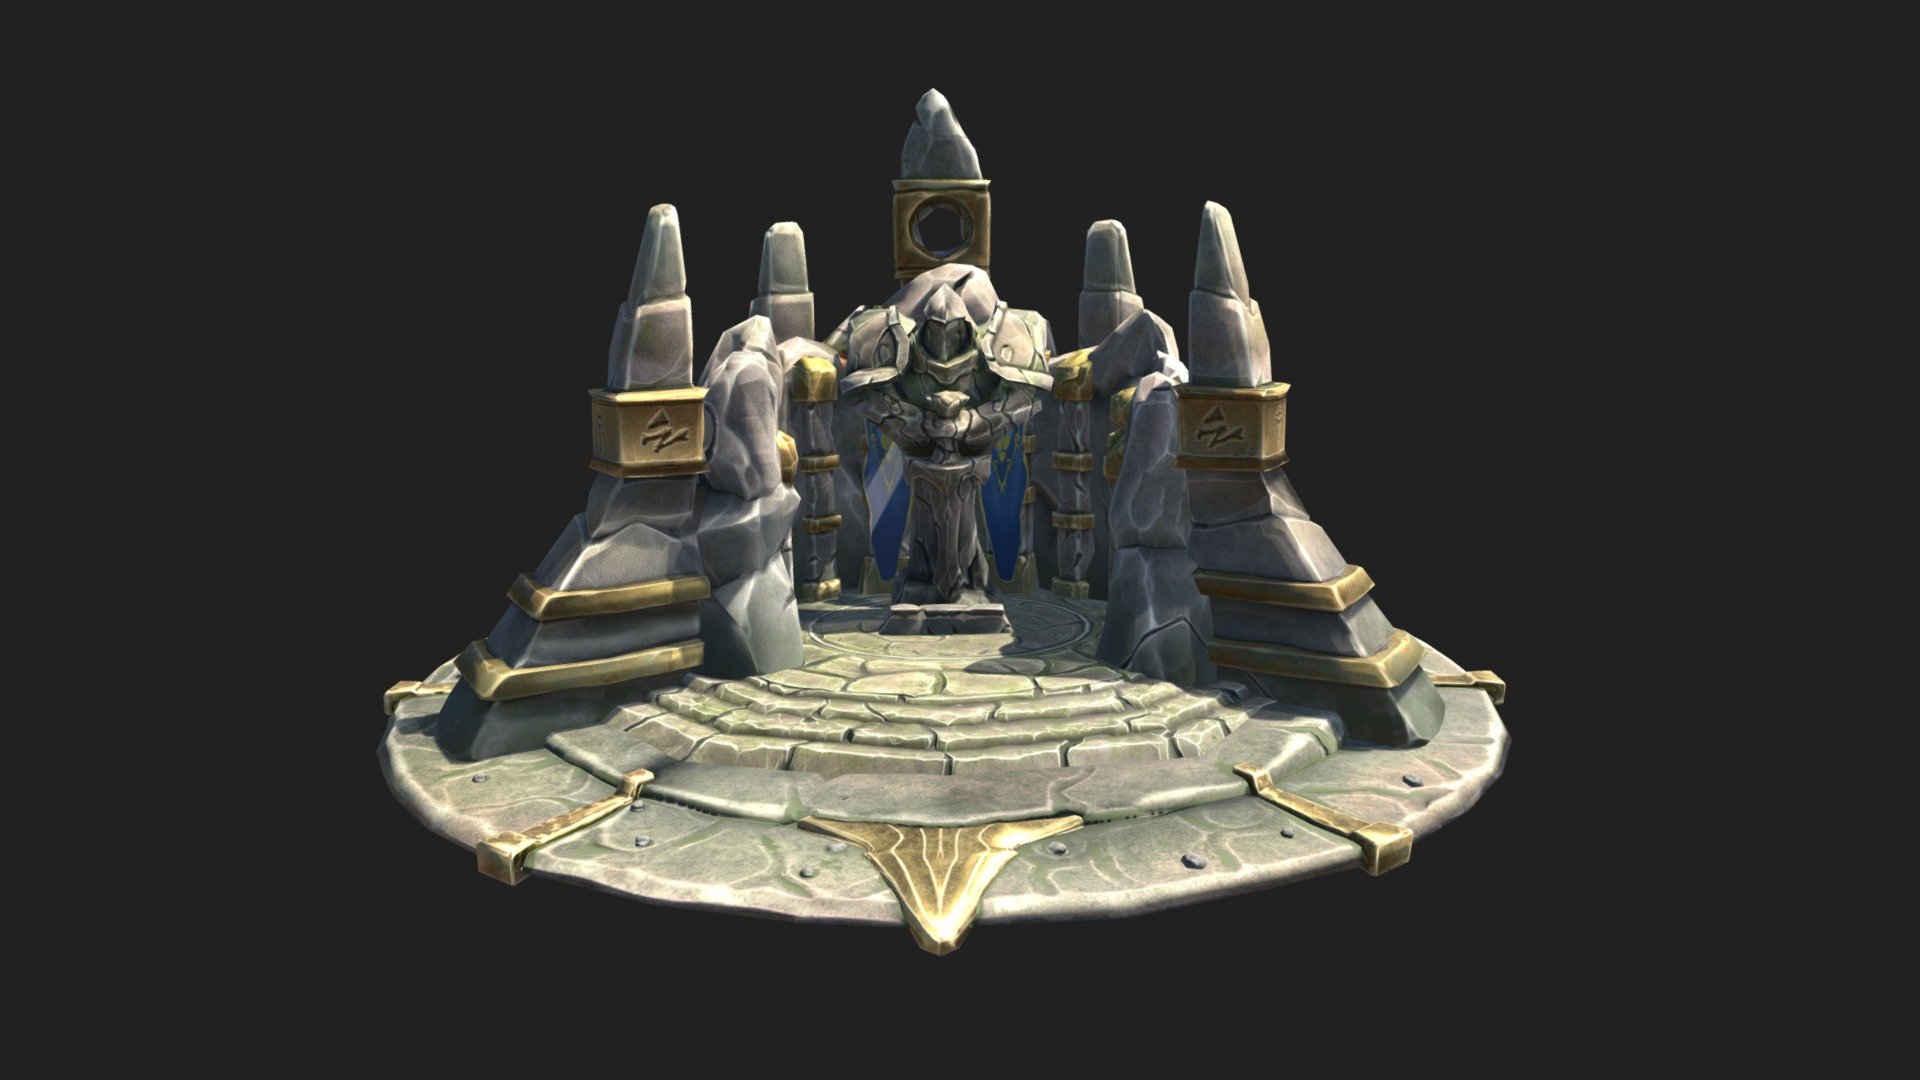 [WoW Fan Art] Alliance Altar
In the big mountains of the Eastern Kingdoms, there are temples dedicated to the holy Alliance. This is an Altar dedicated to the Soldiers of the Alliance, where people prey for them, facing the big statue in the middle of the Temple, sometimes offering presents on the old stone table in front of the statue.

https://www.artstation.com/artwork/Z5YbDN - WOW FANART Alliance Praying Altar - 3D model by Arkanis 3d model